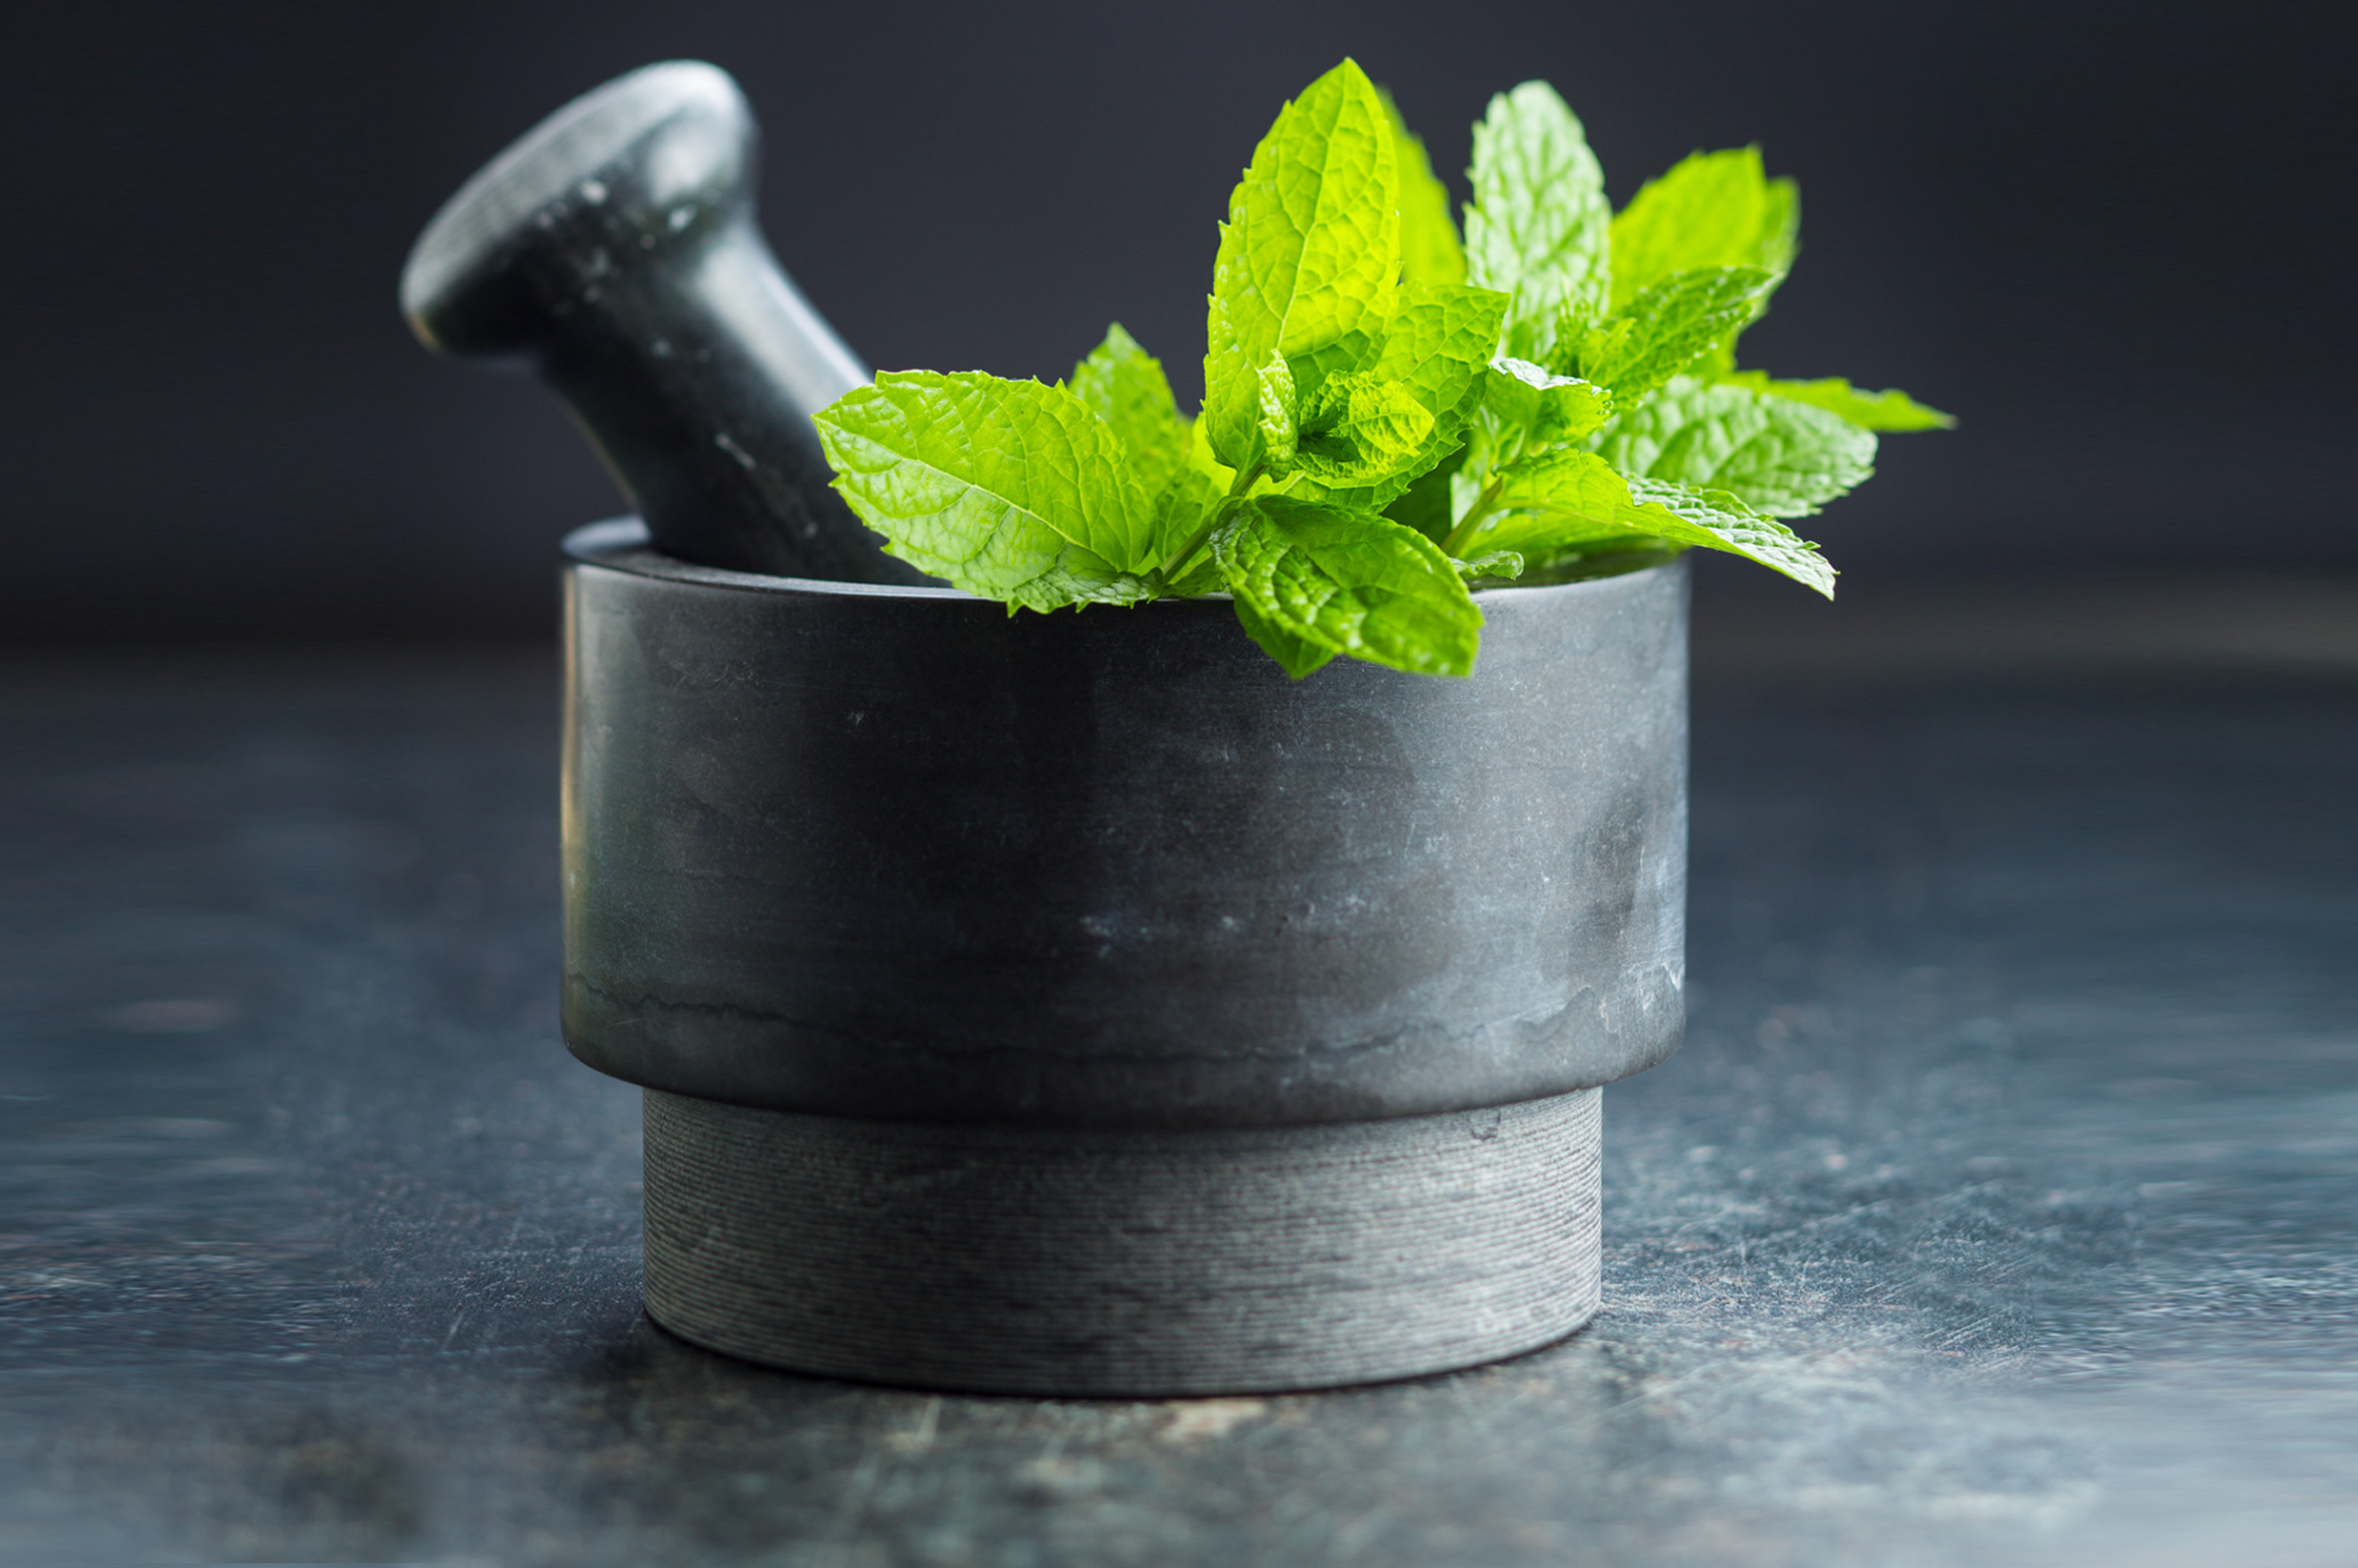 Peppermint Pals or Toxic Treats? The Truth About Mint for Pets